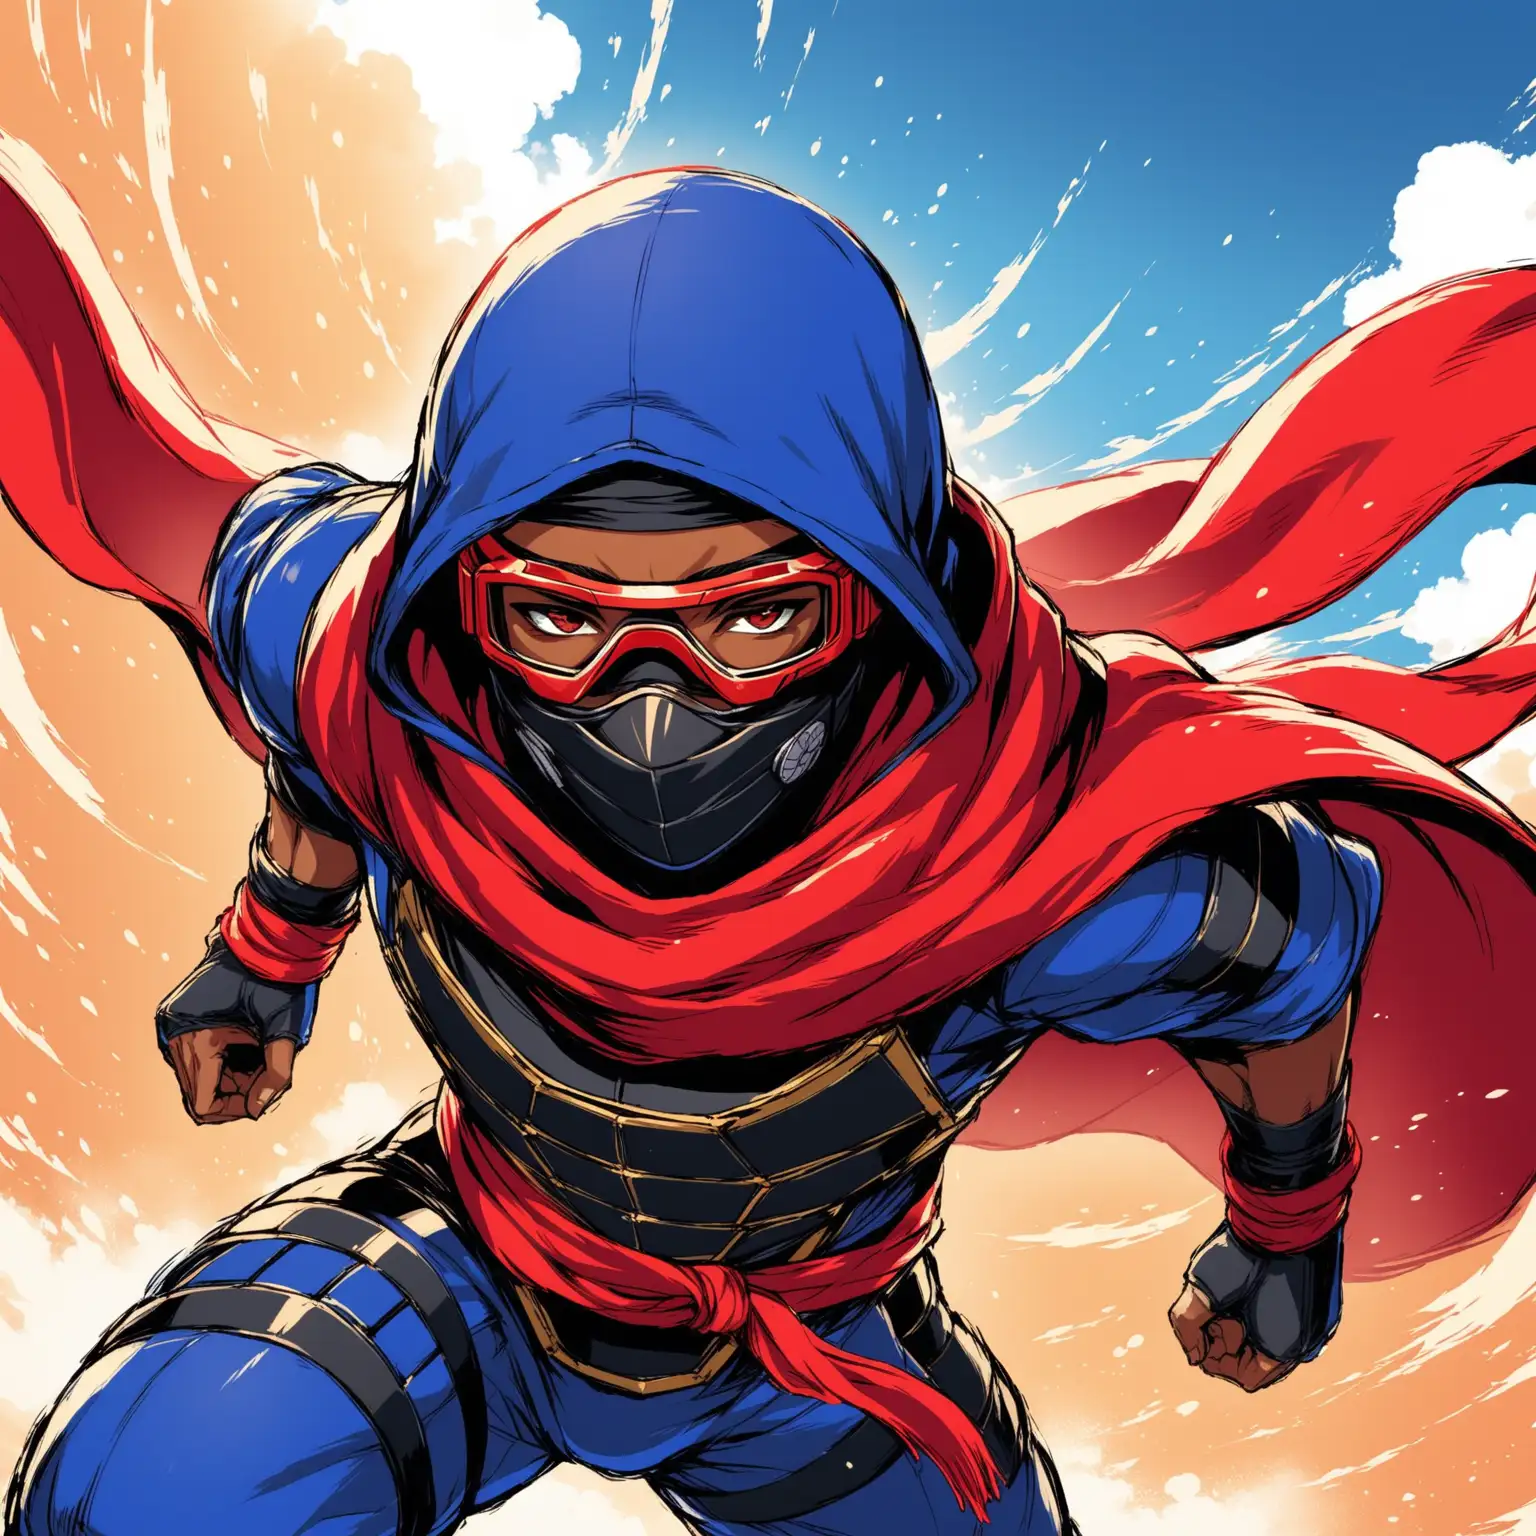 African American Ninja in Royal Blue Armor with Scarlet Red Scarf and Ski Goggles